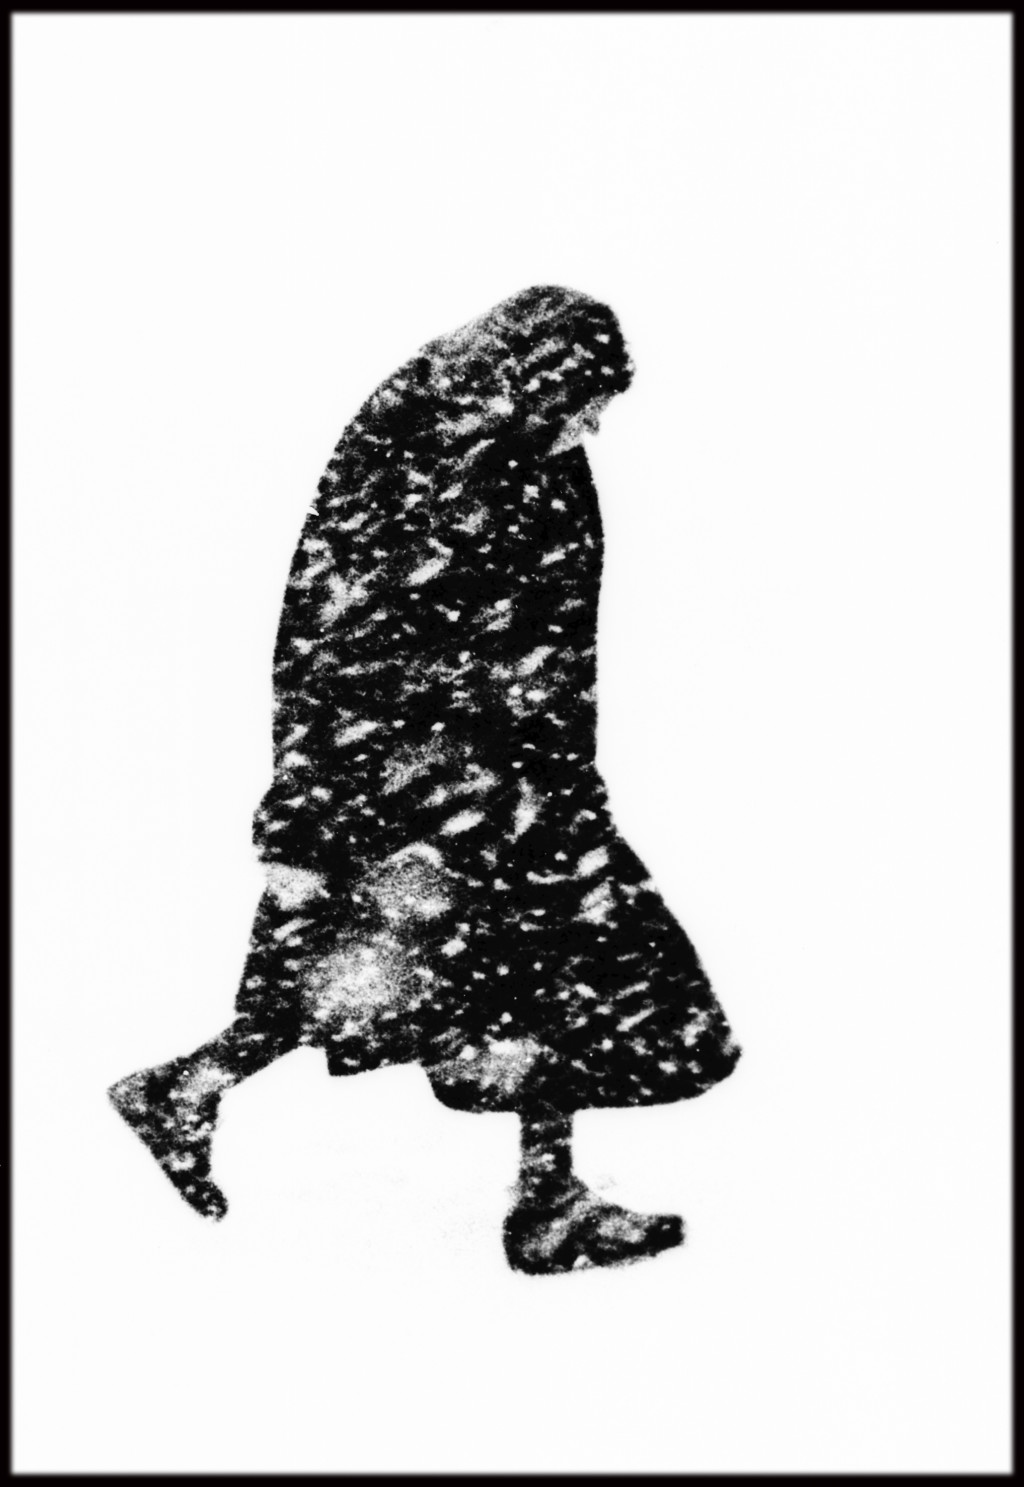 GERMANY, 1954. Hamburg, old woman in a snowstorm.